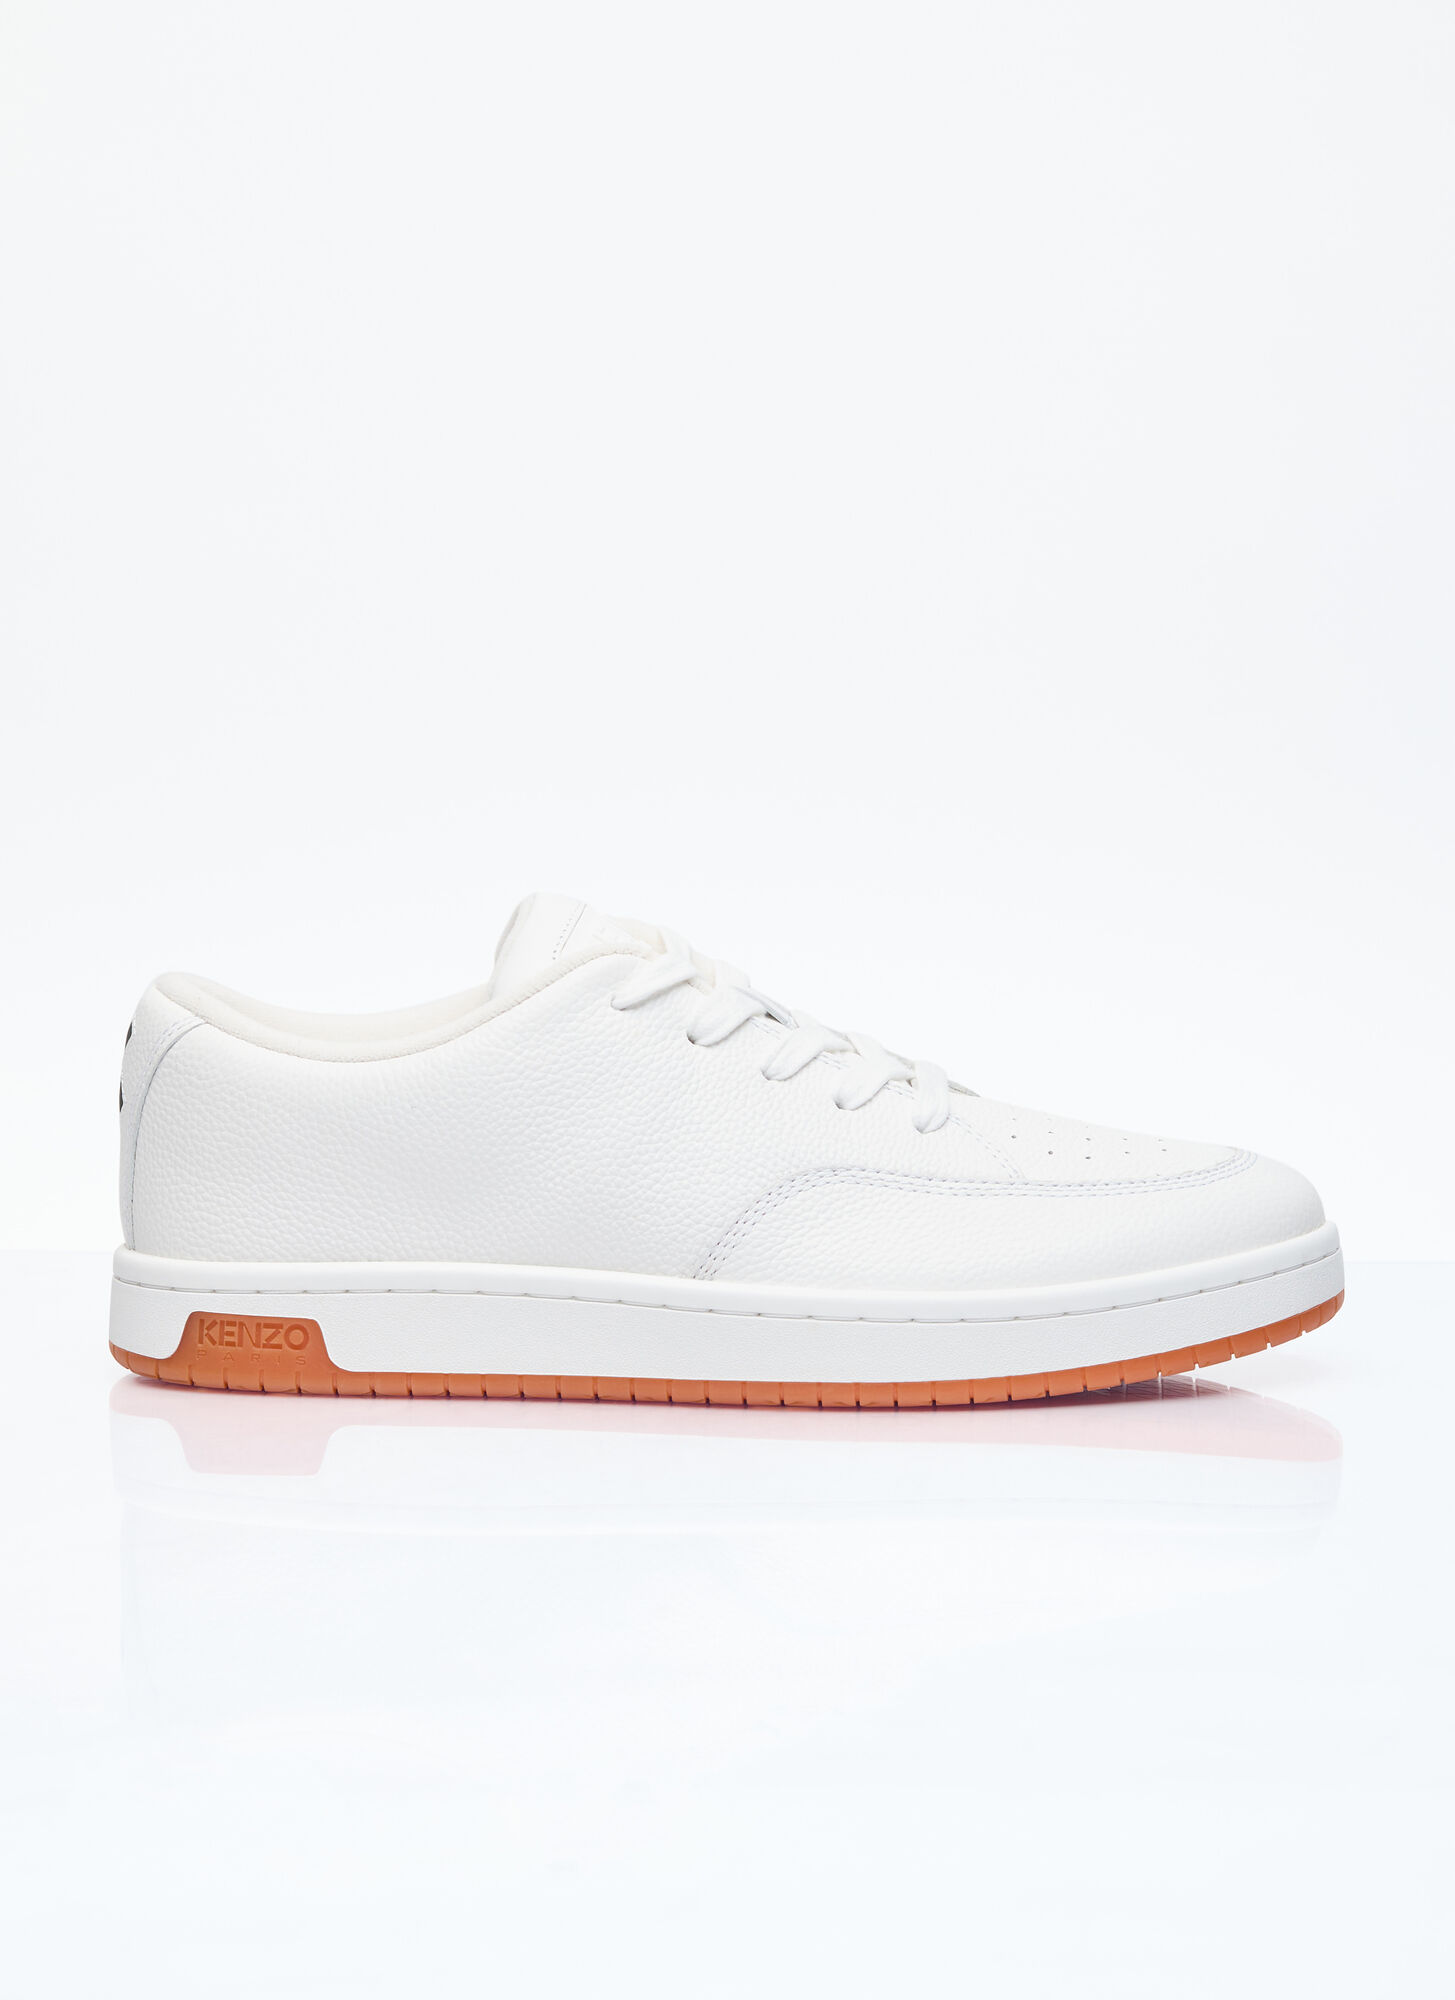 Shop Kenzo Dome Sneakers In White